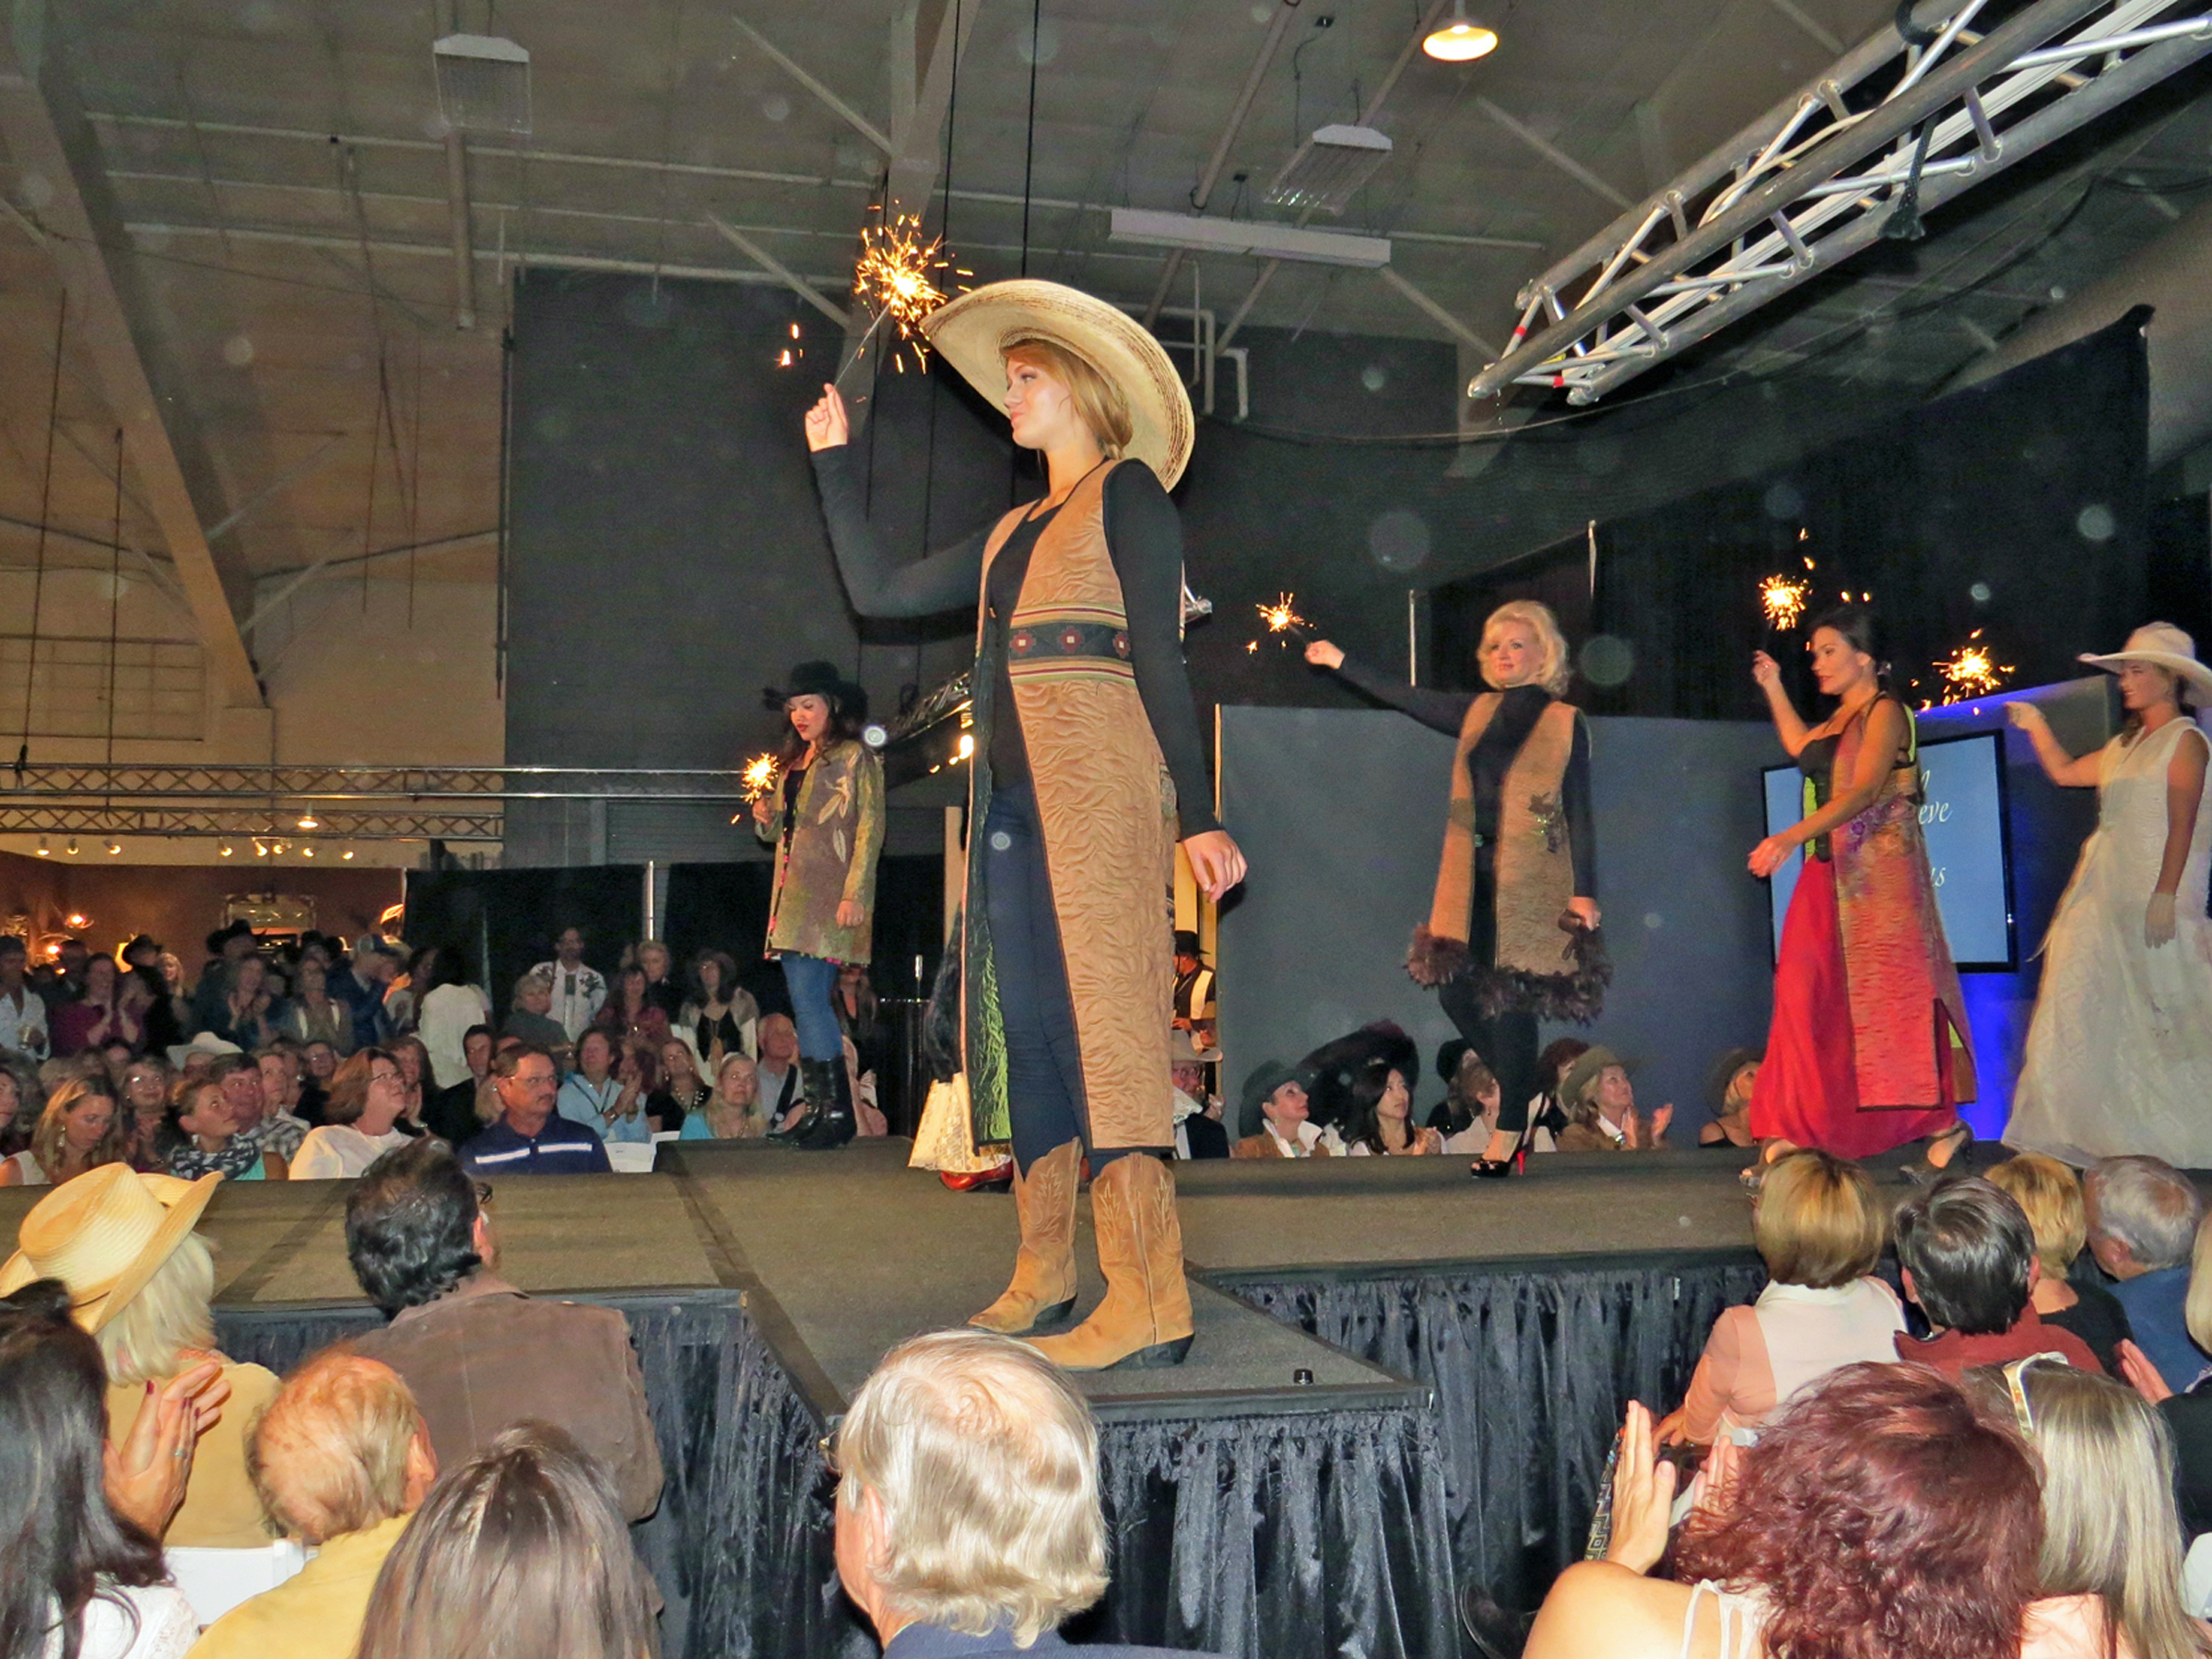 The Western Design Conference Fashion Show brings a variety of cowboy couture collections to the runway in this signature event of the Jackson Hole Fall Arts Festival.